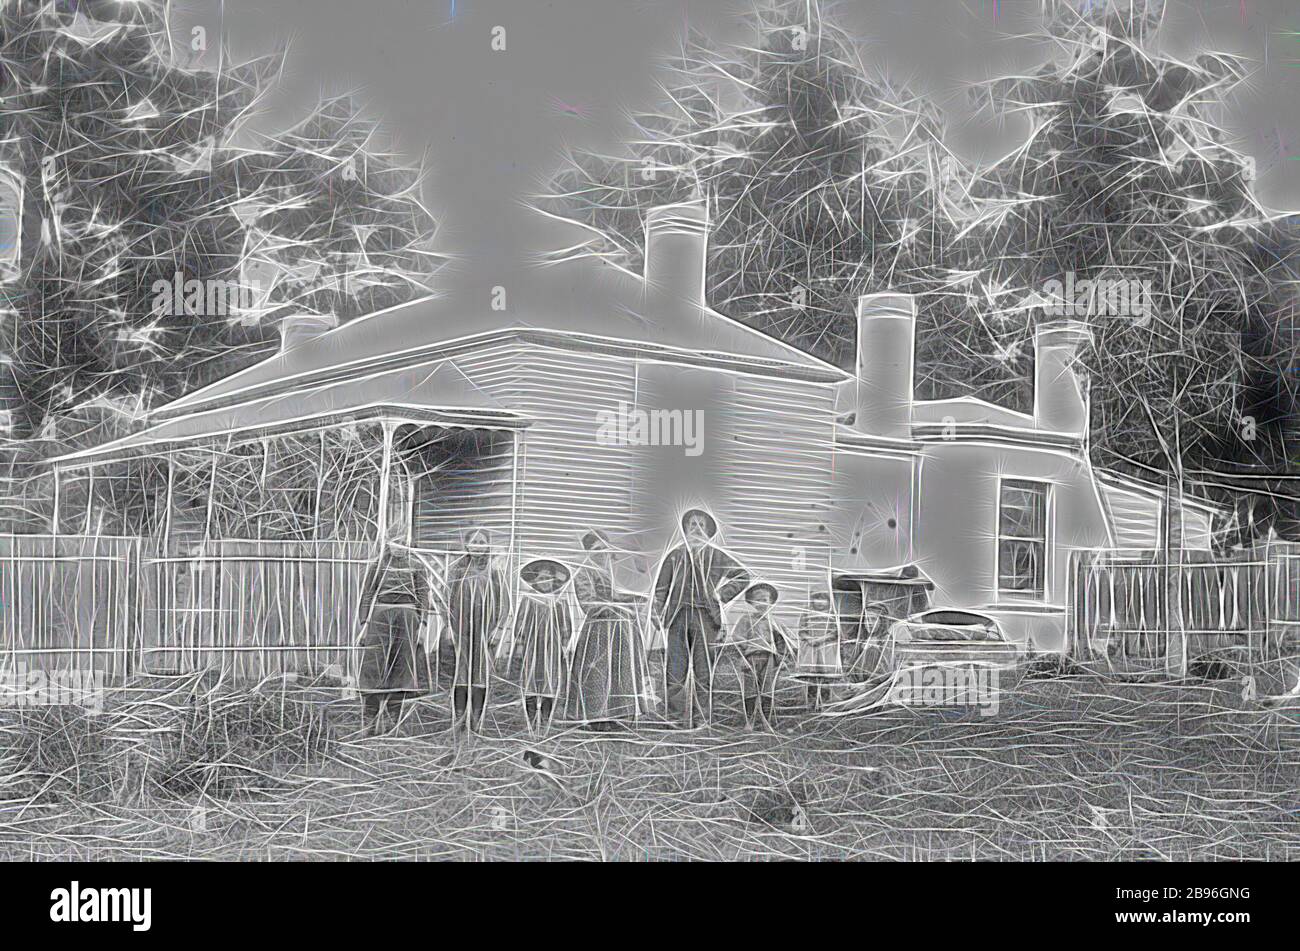 Negative - Moorabbin, Victoria, circa 1900, The Northway family pictured outside their home at Moorabbin. It is a weatherboard house which has been extended at the back., Reimagined by Gibon, design of warm cheerful glowing of brightness and light rays radiance. Classic art reinvented with a modern twist. Photography inspired by futurism, embracing dynamic energy of modern technology, movement, speed and revolutionize culture. Stock Photo